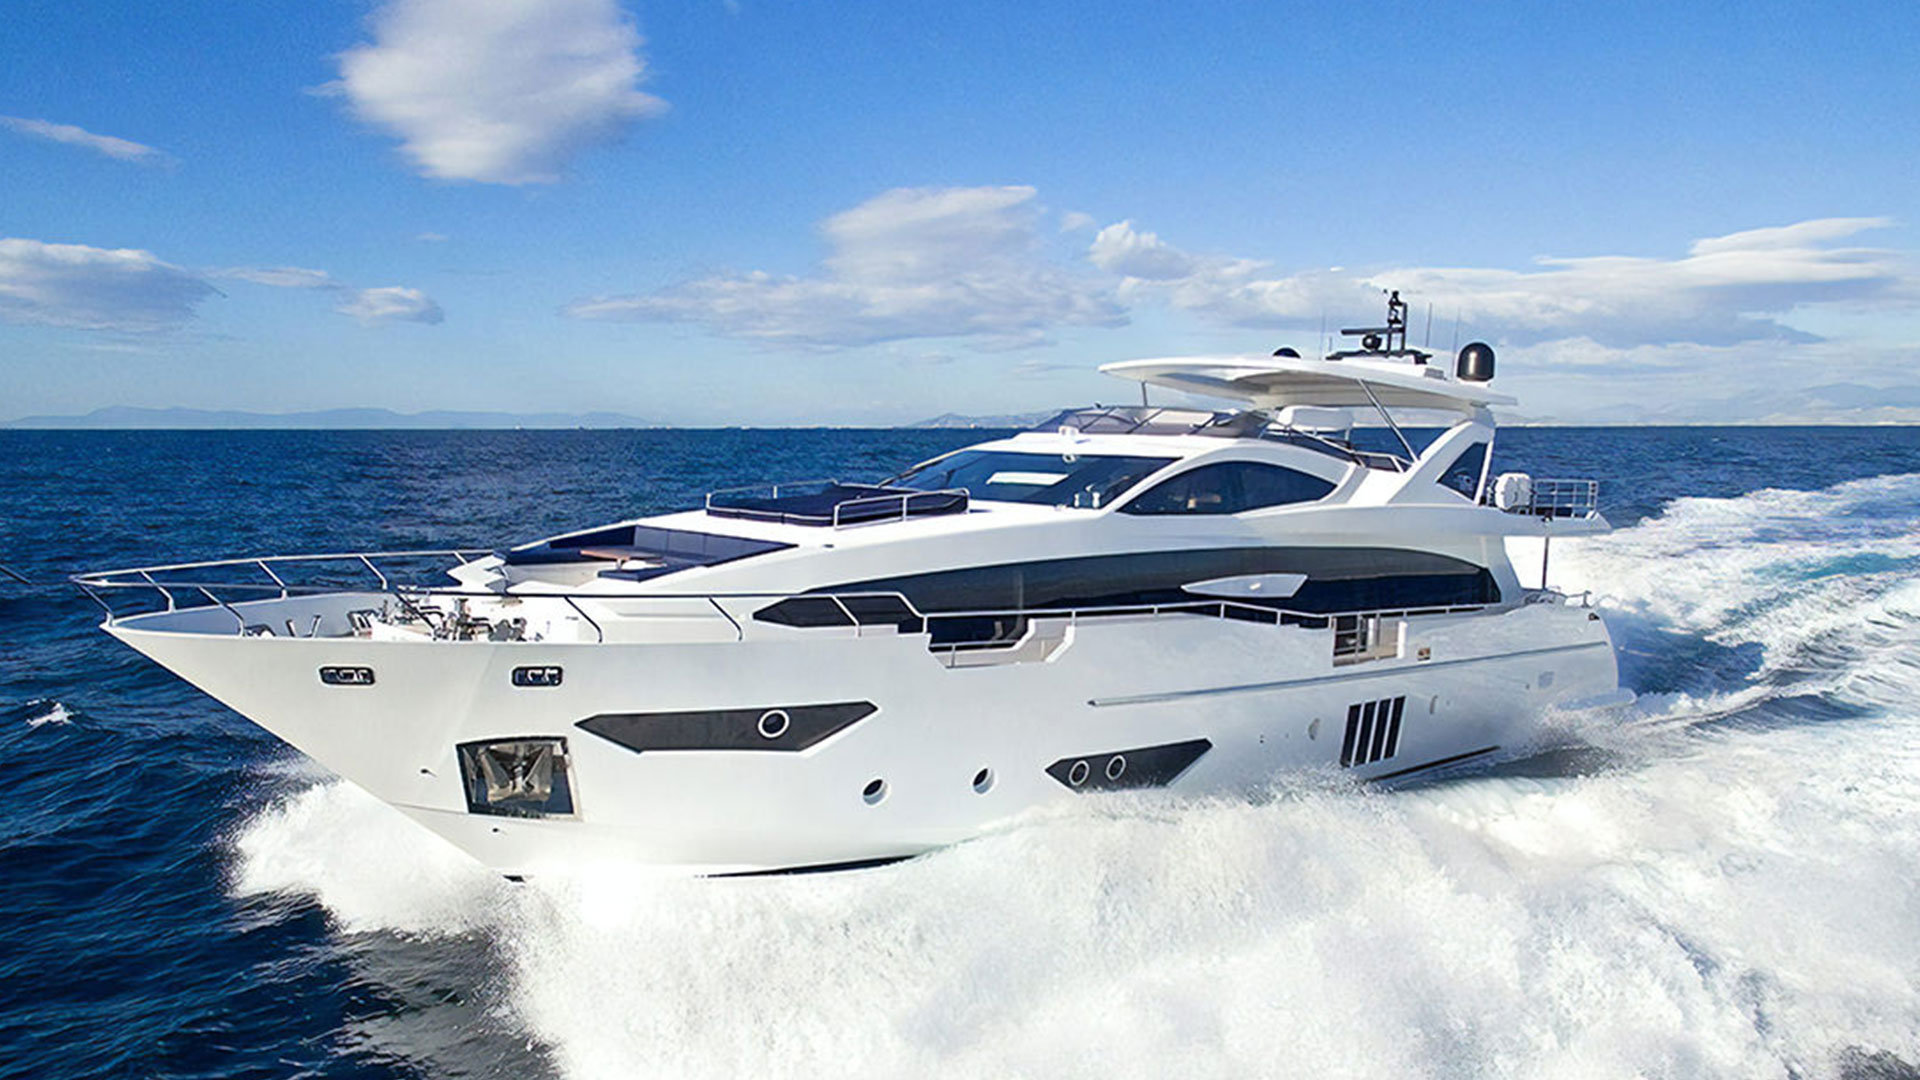 29m Azimut motor yacht Memories Too sold by Nautique Yachting